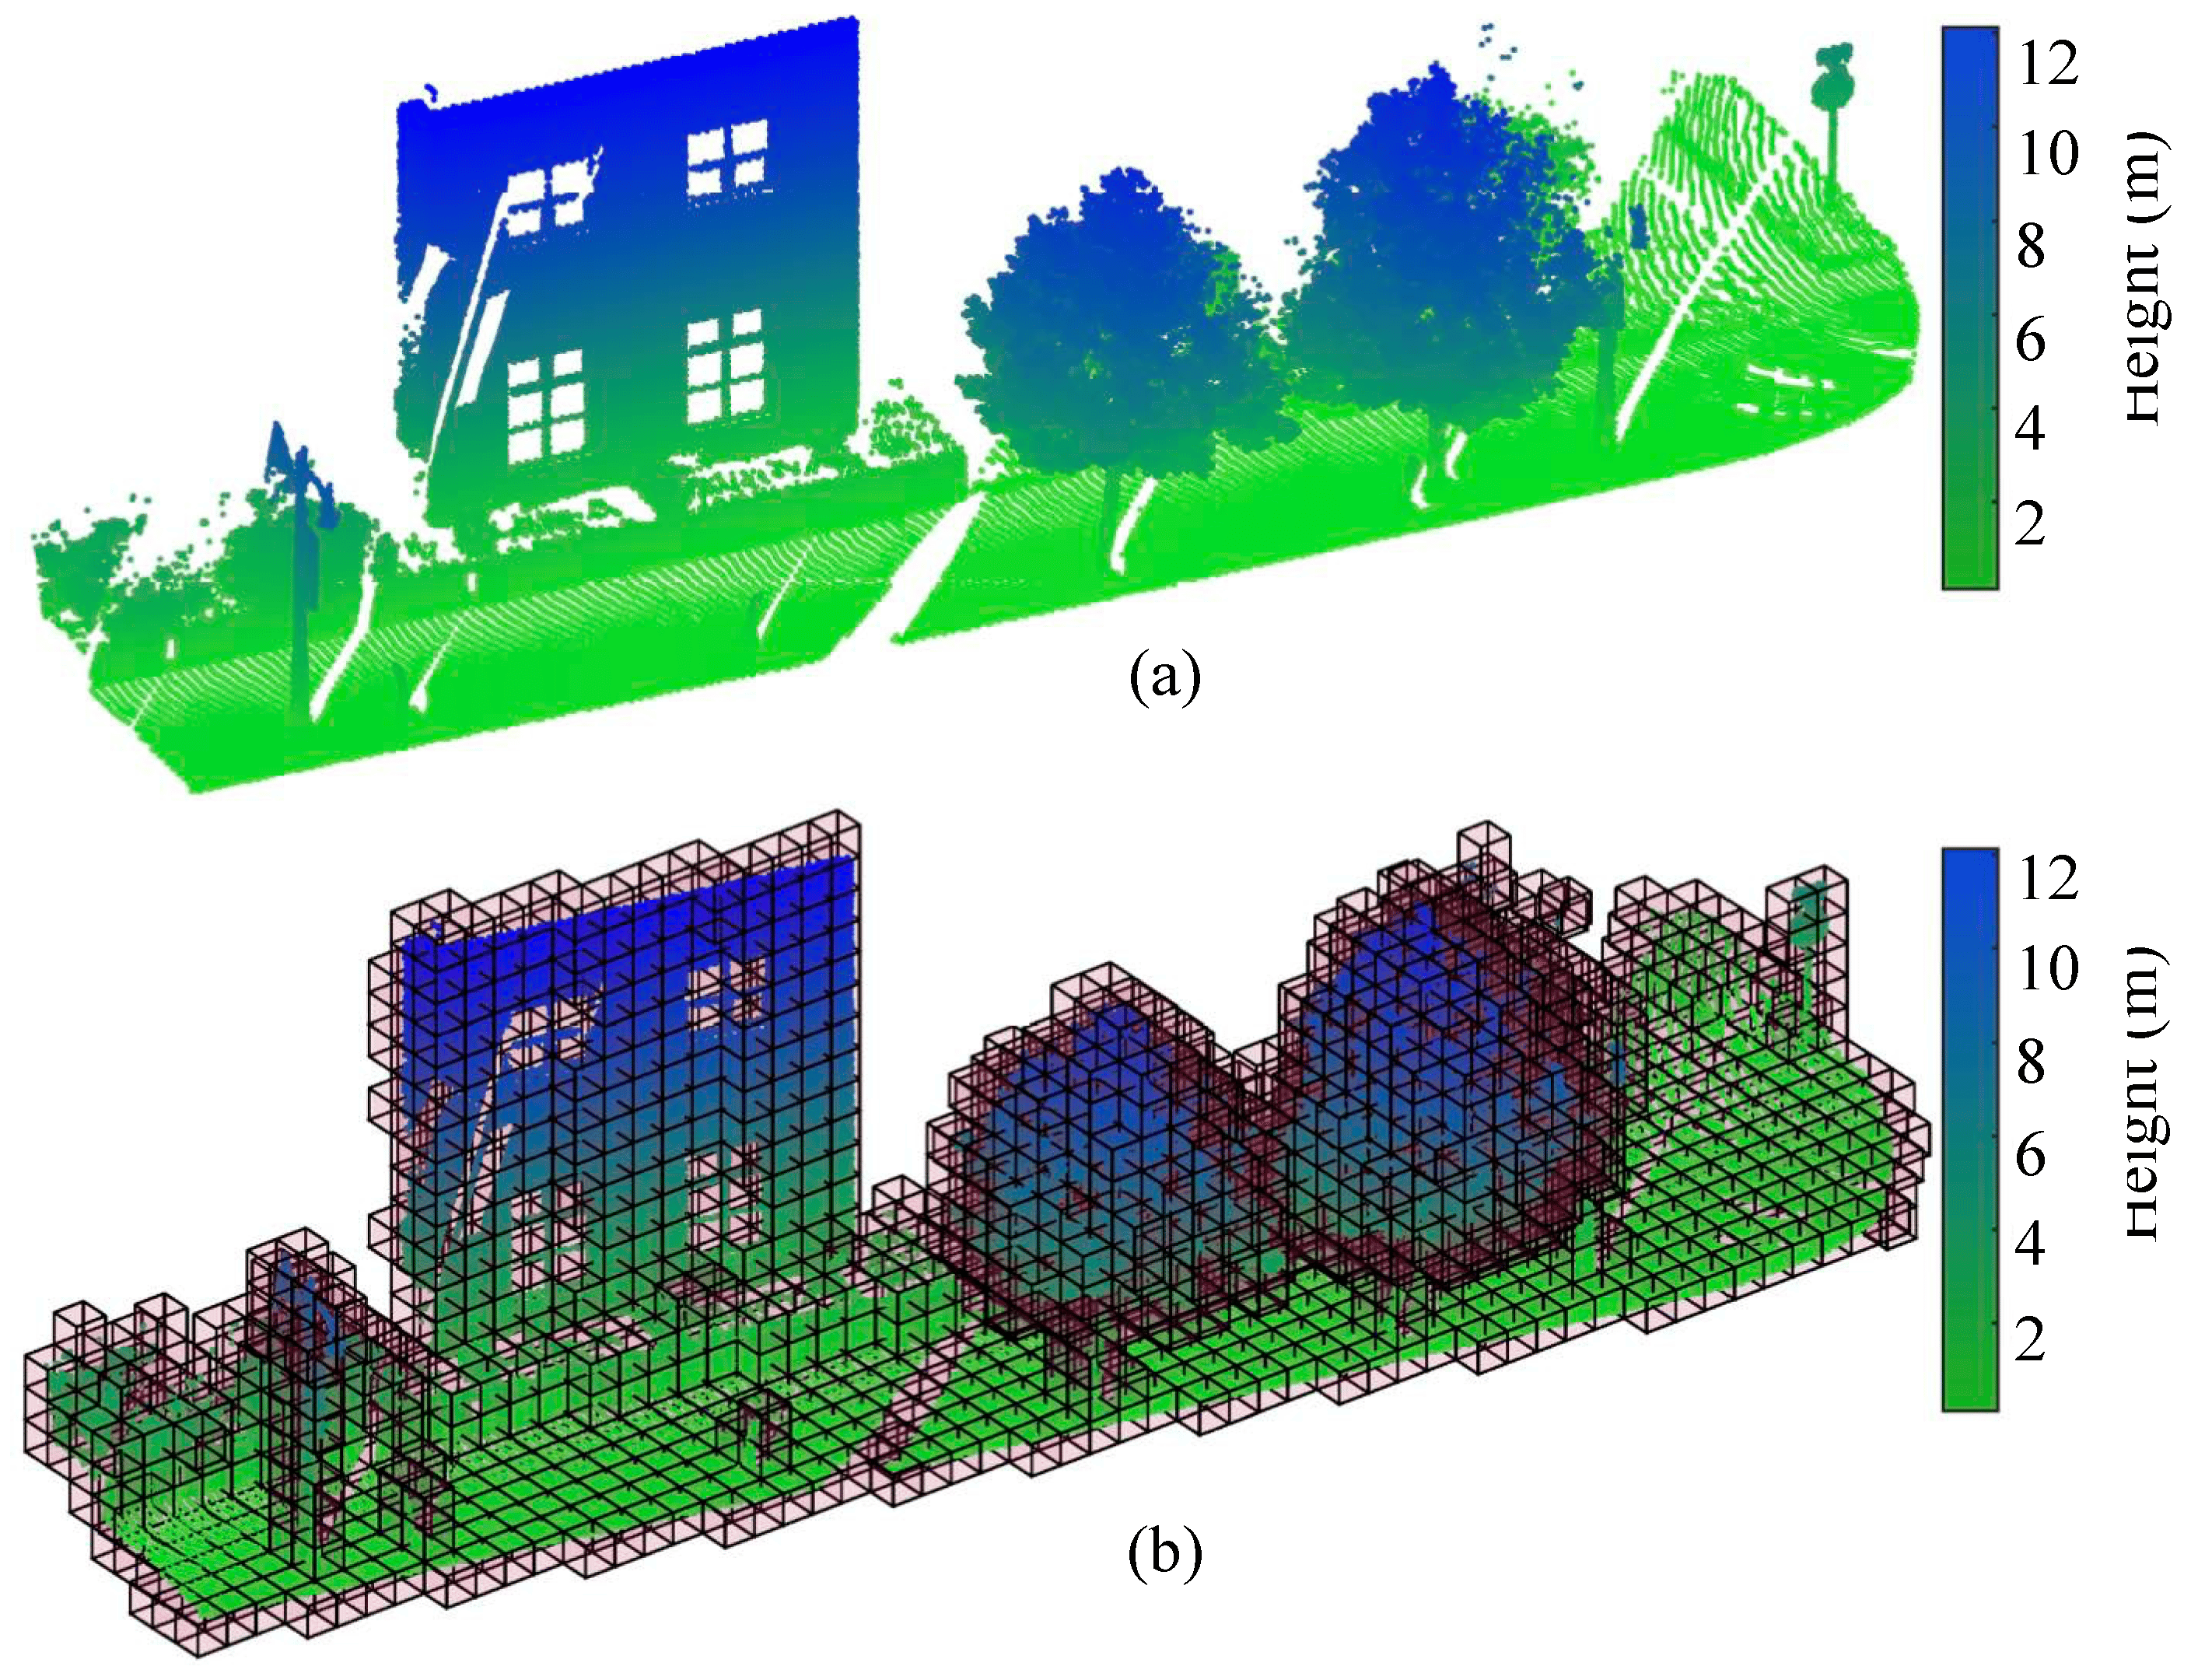 A point cloud and the representation of its voxel grid